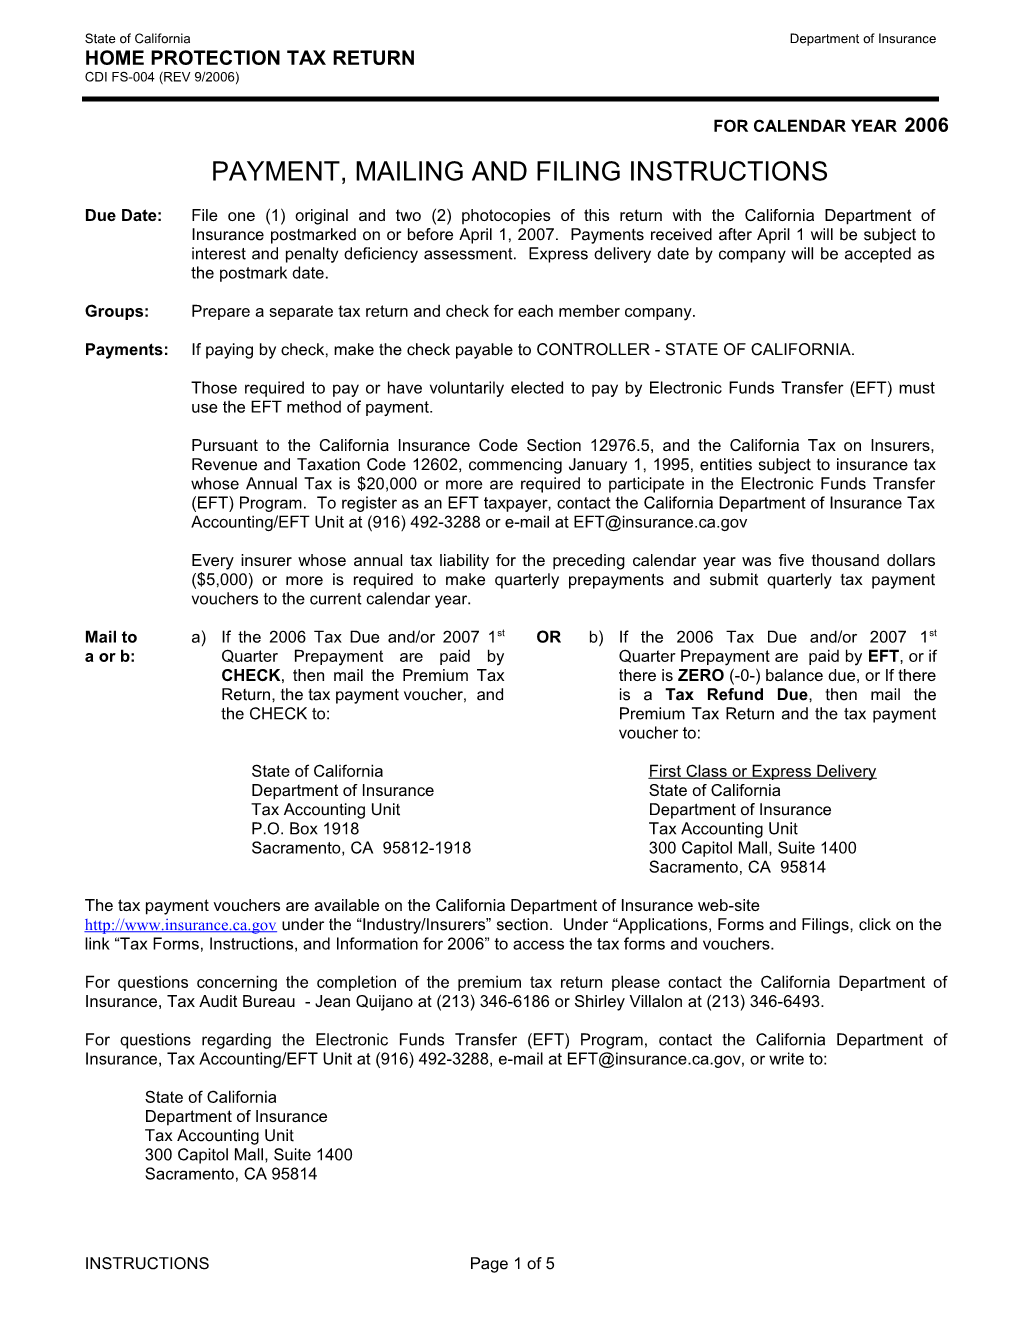 Payment, Mailing and Filing Instructions s1